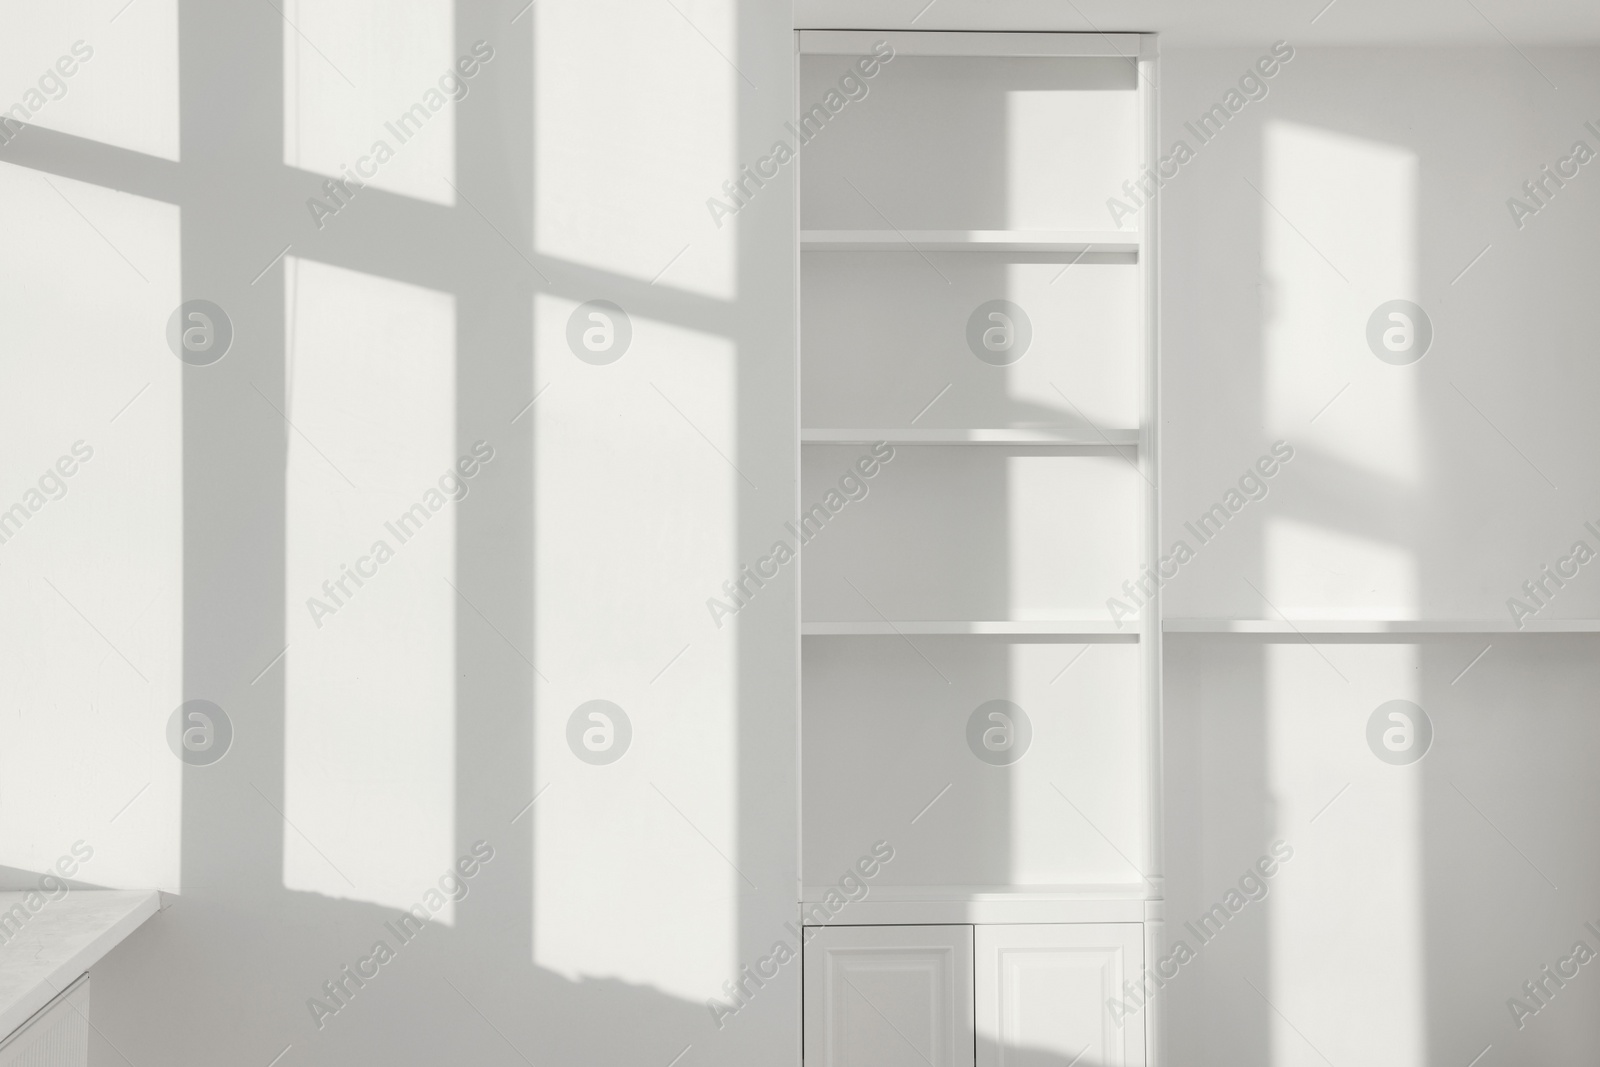 Photo of Light and shadows from window on wall and shelving unit indoors